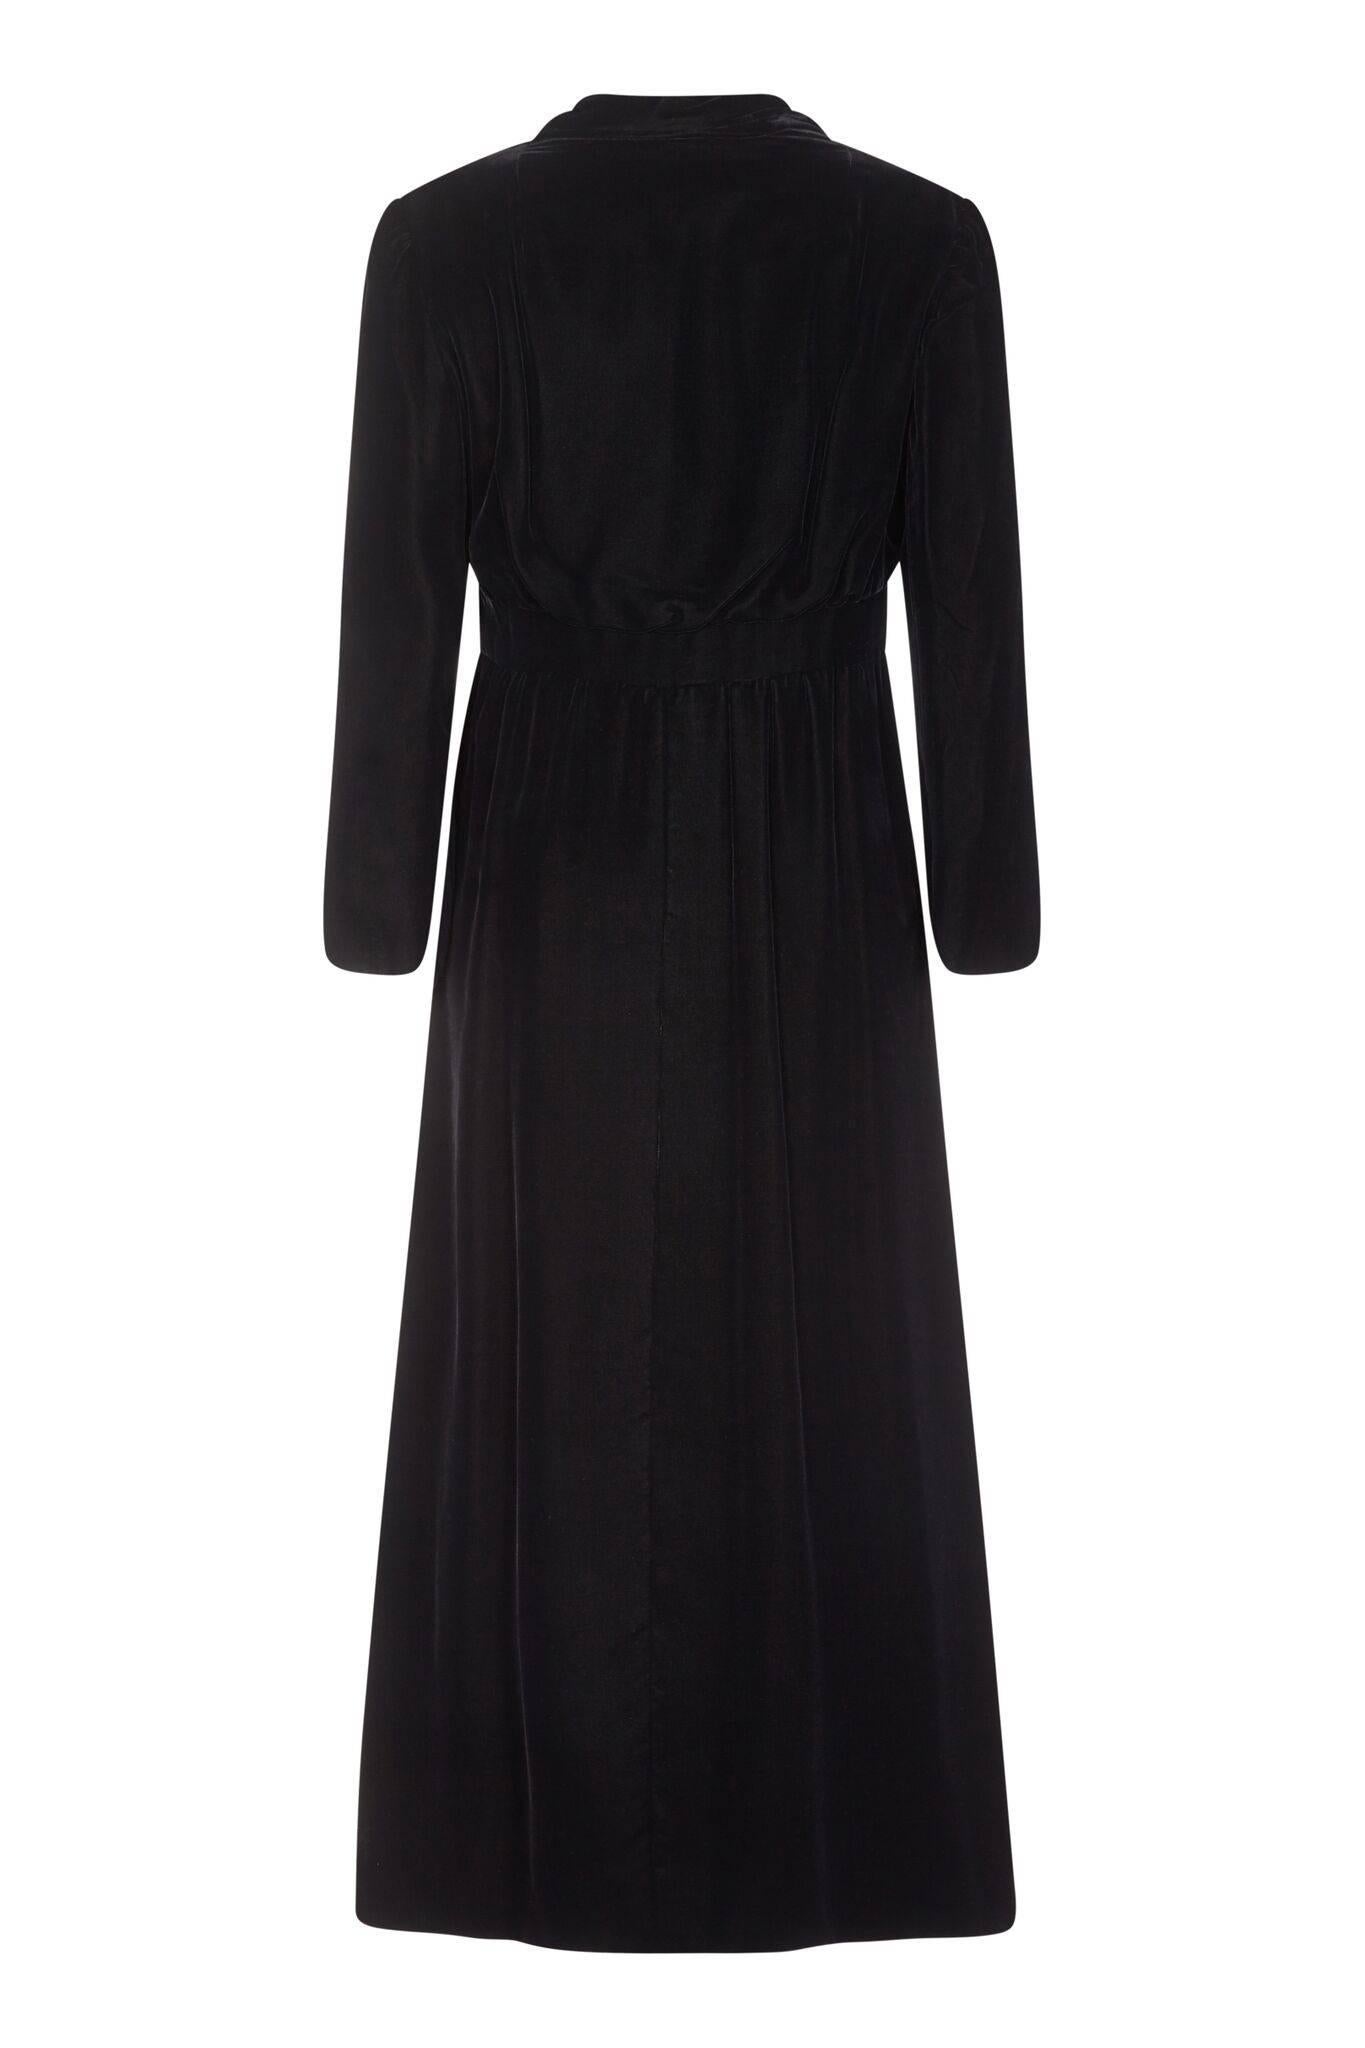 This elegant Valentino 1960s coat was an early collaboration with the then chic department store Debenham and Freebody who were licensed to reproduce his celebrated couture designs. The floor sweeping coat is made of luxurious black velvet and silk